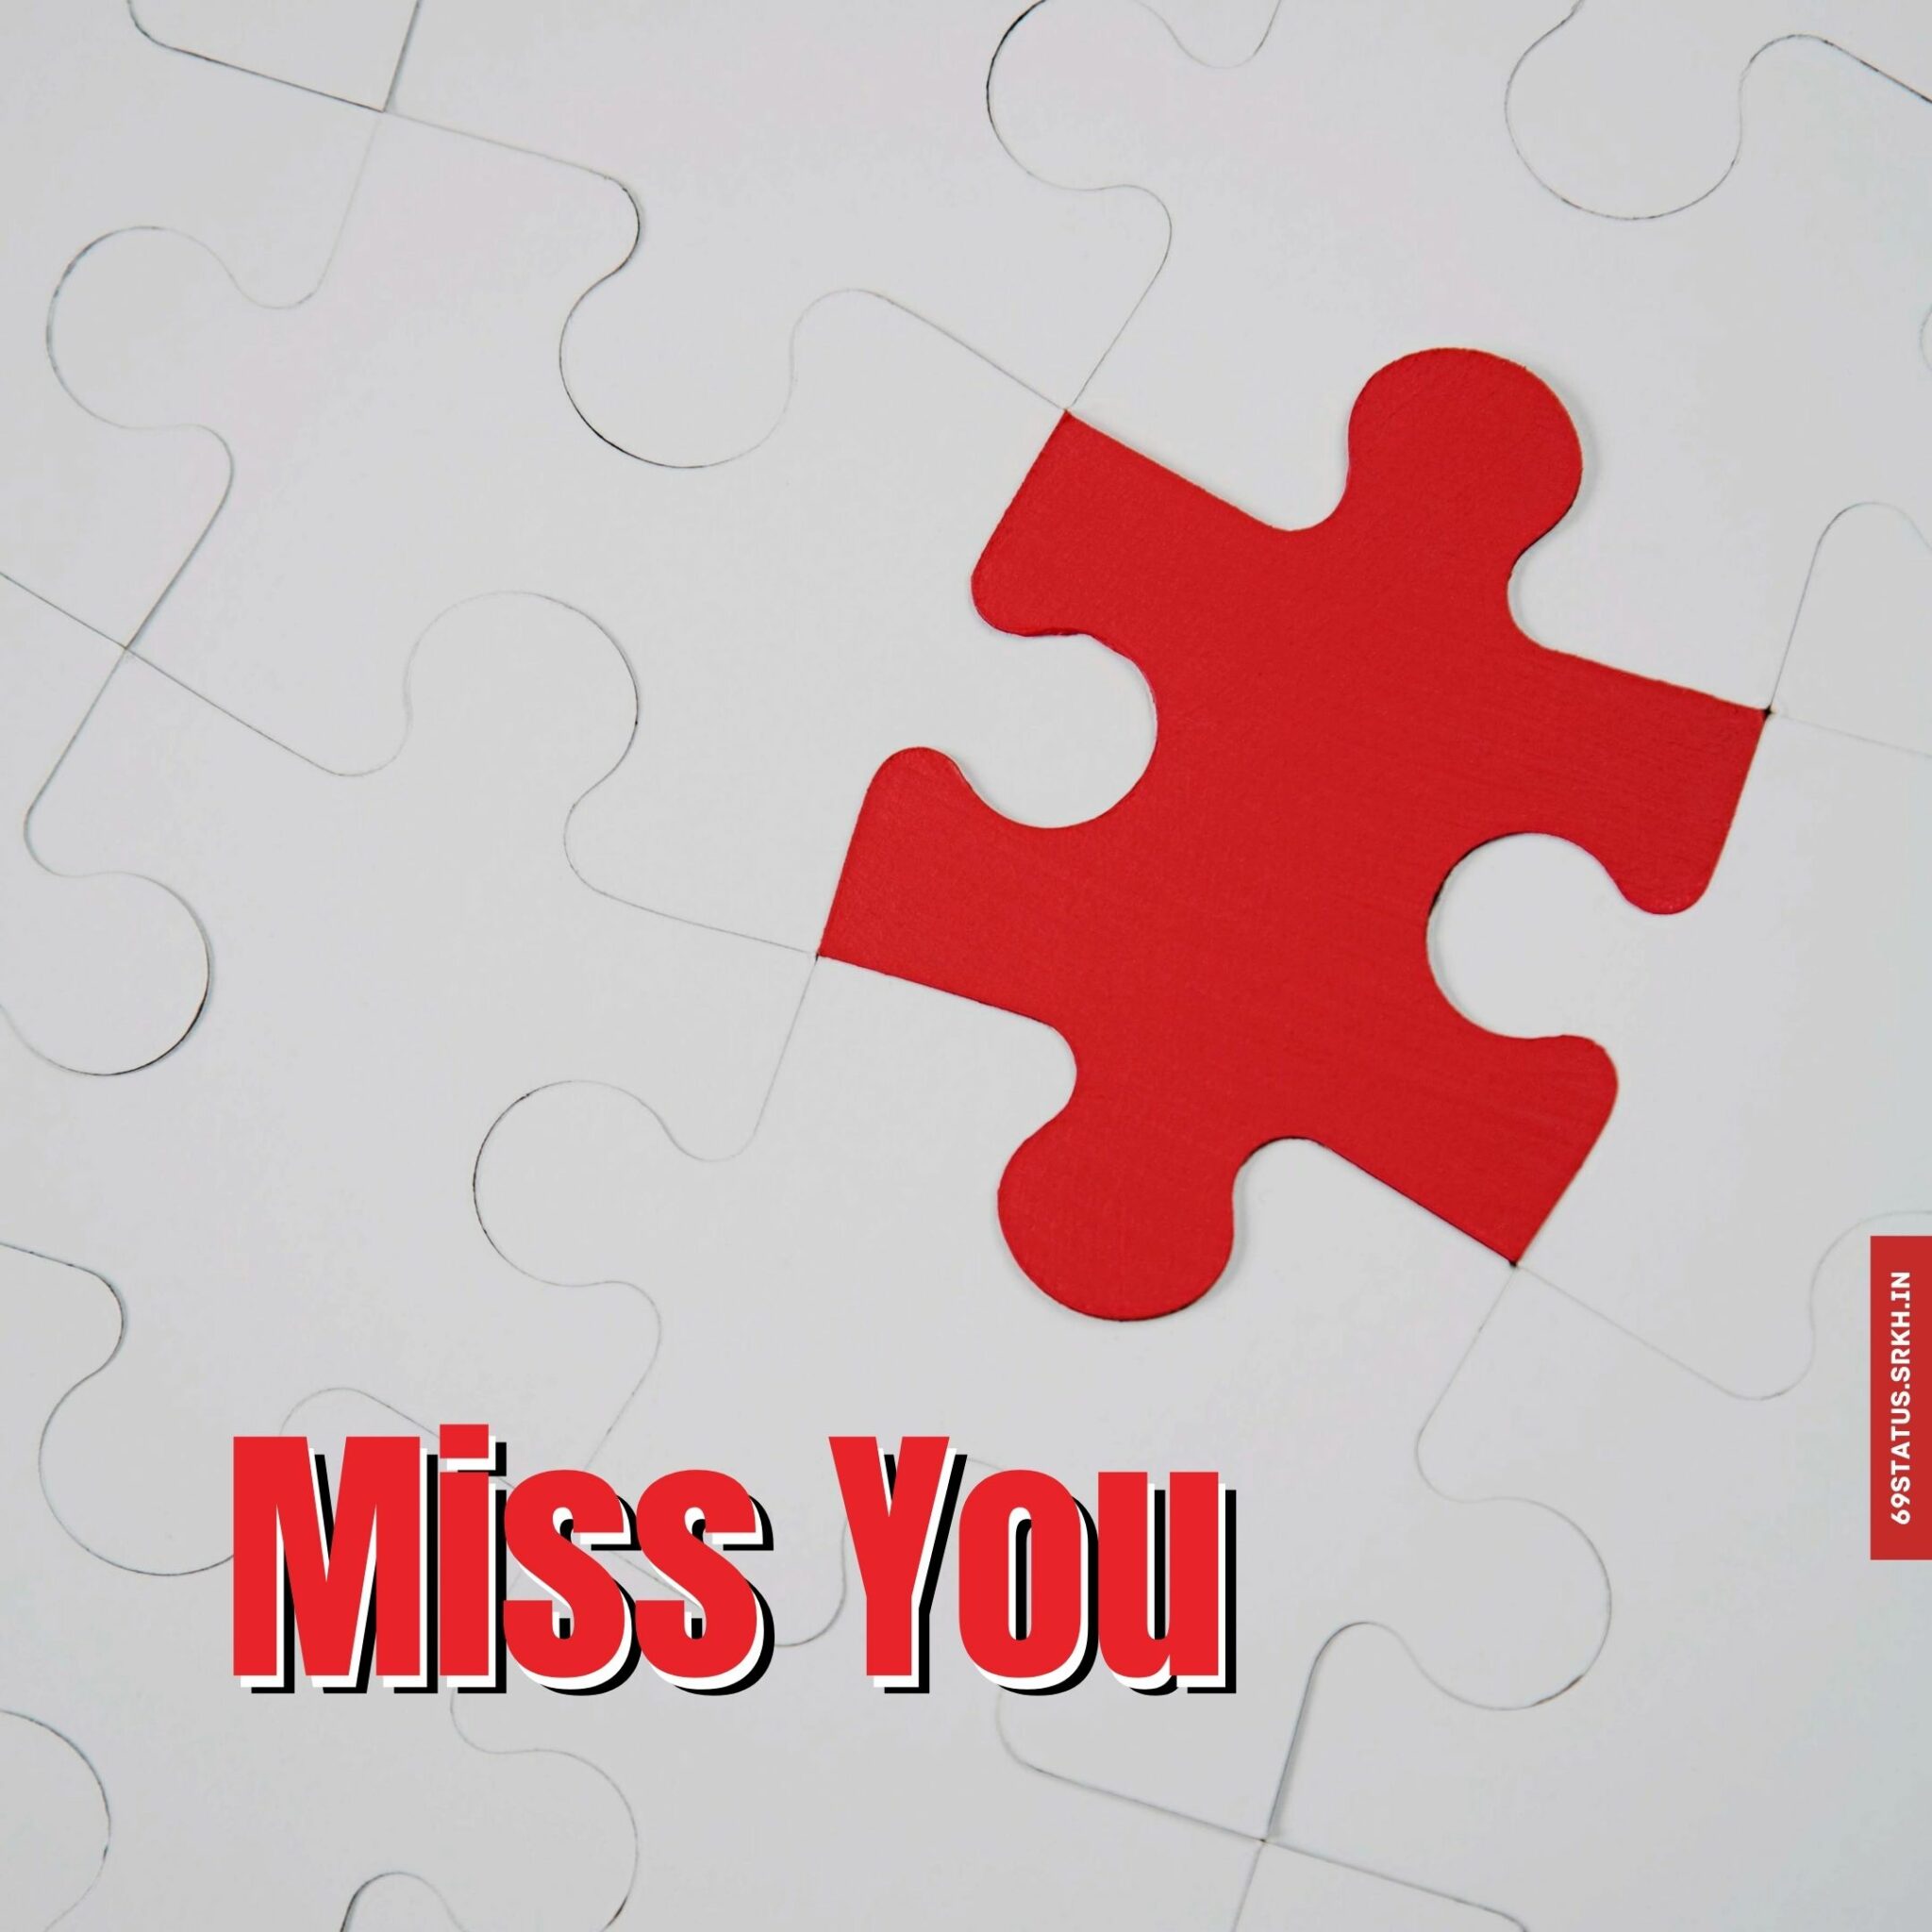 Miss you image in full hd